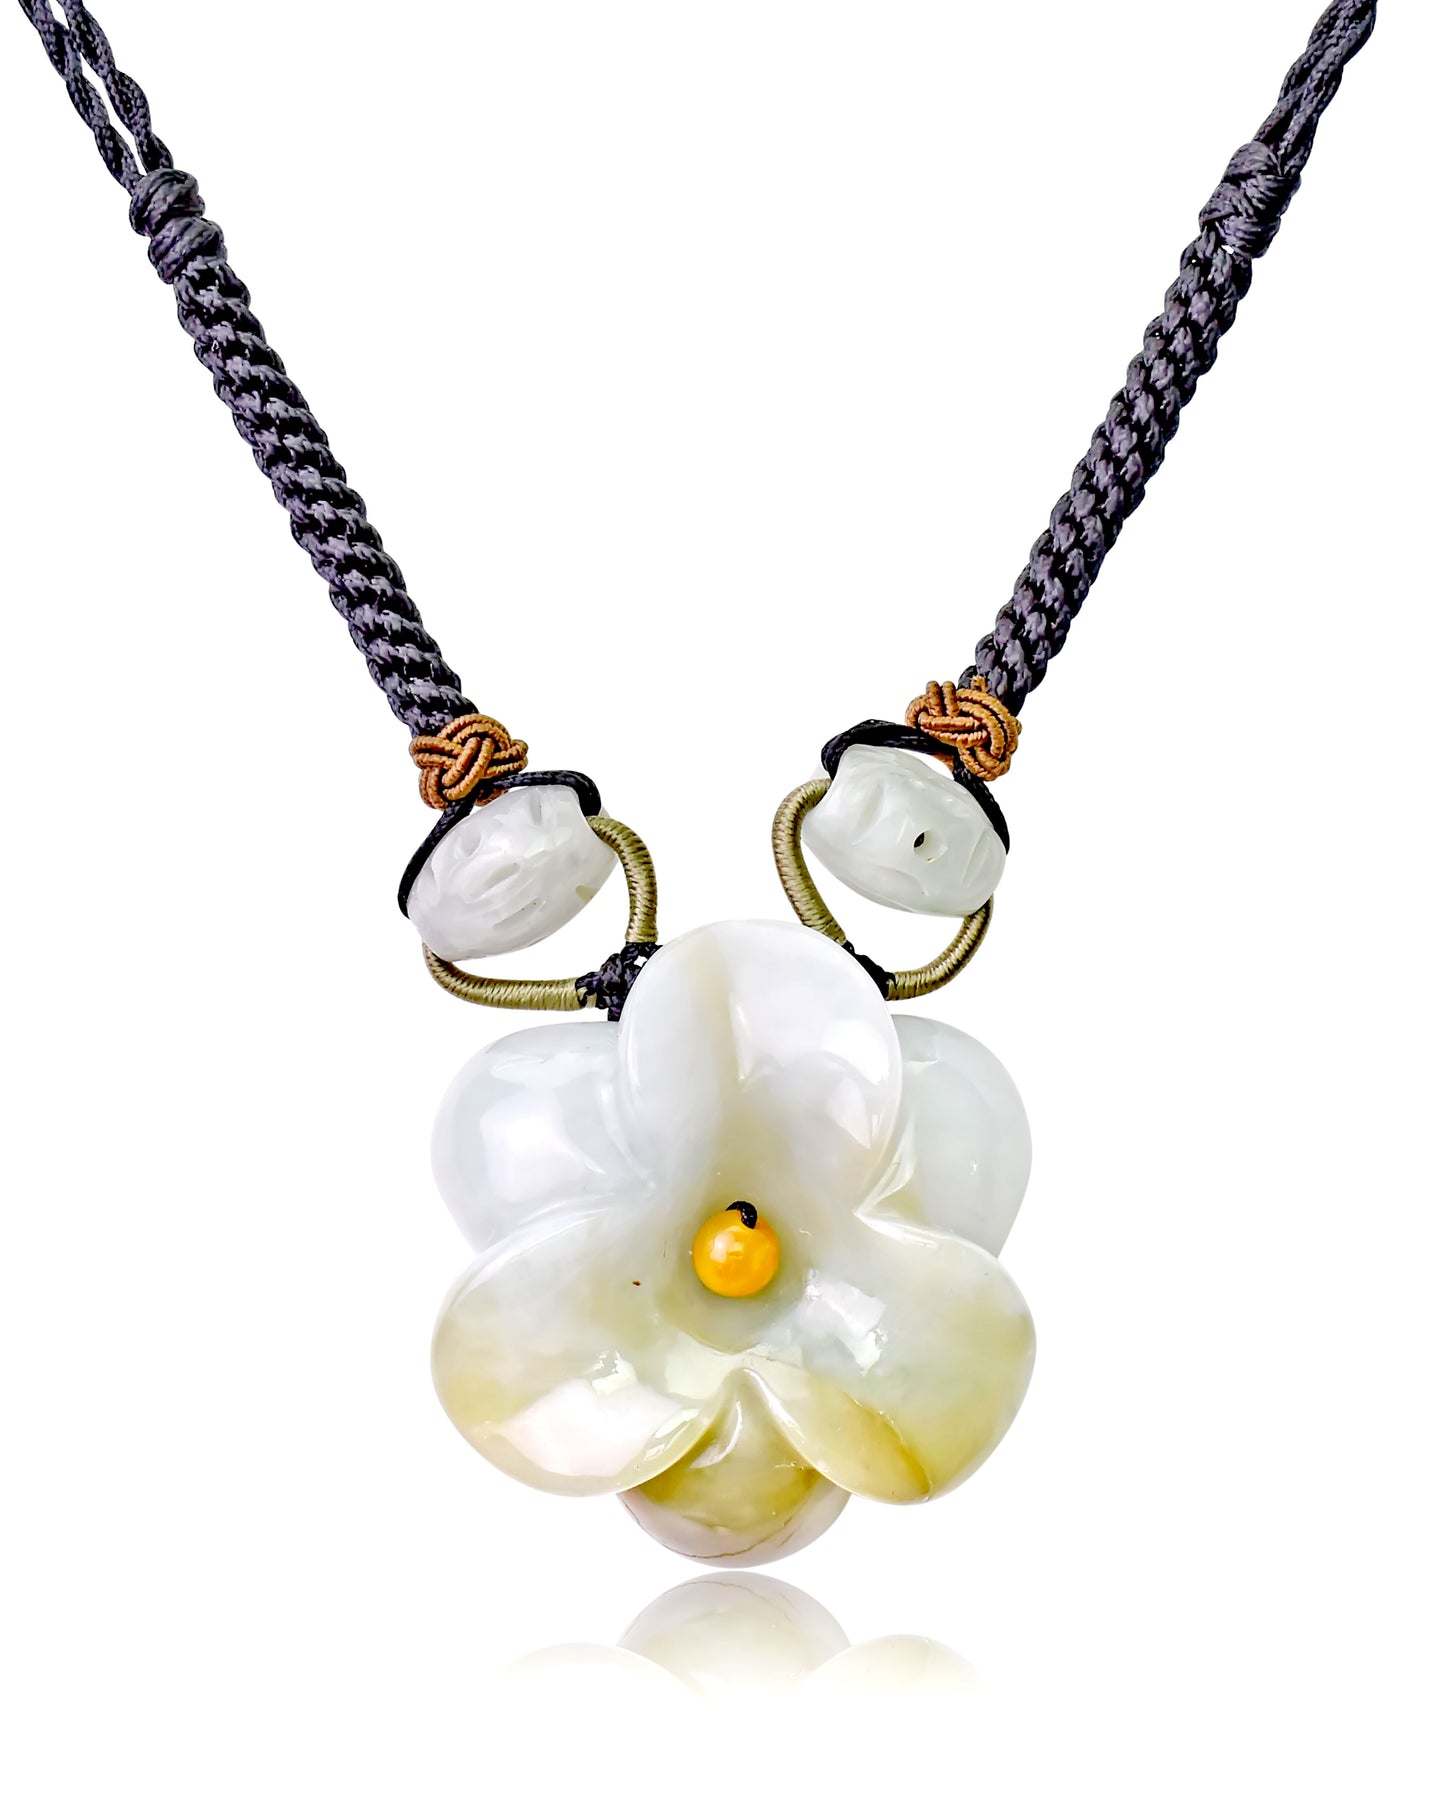 Get Playful and Sparkle with your Outfit: Amaryllis Jade Necklace